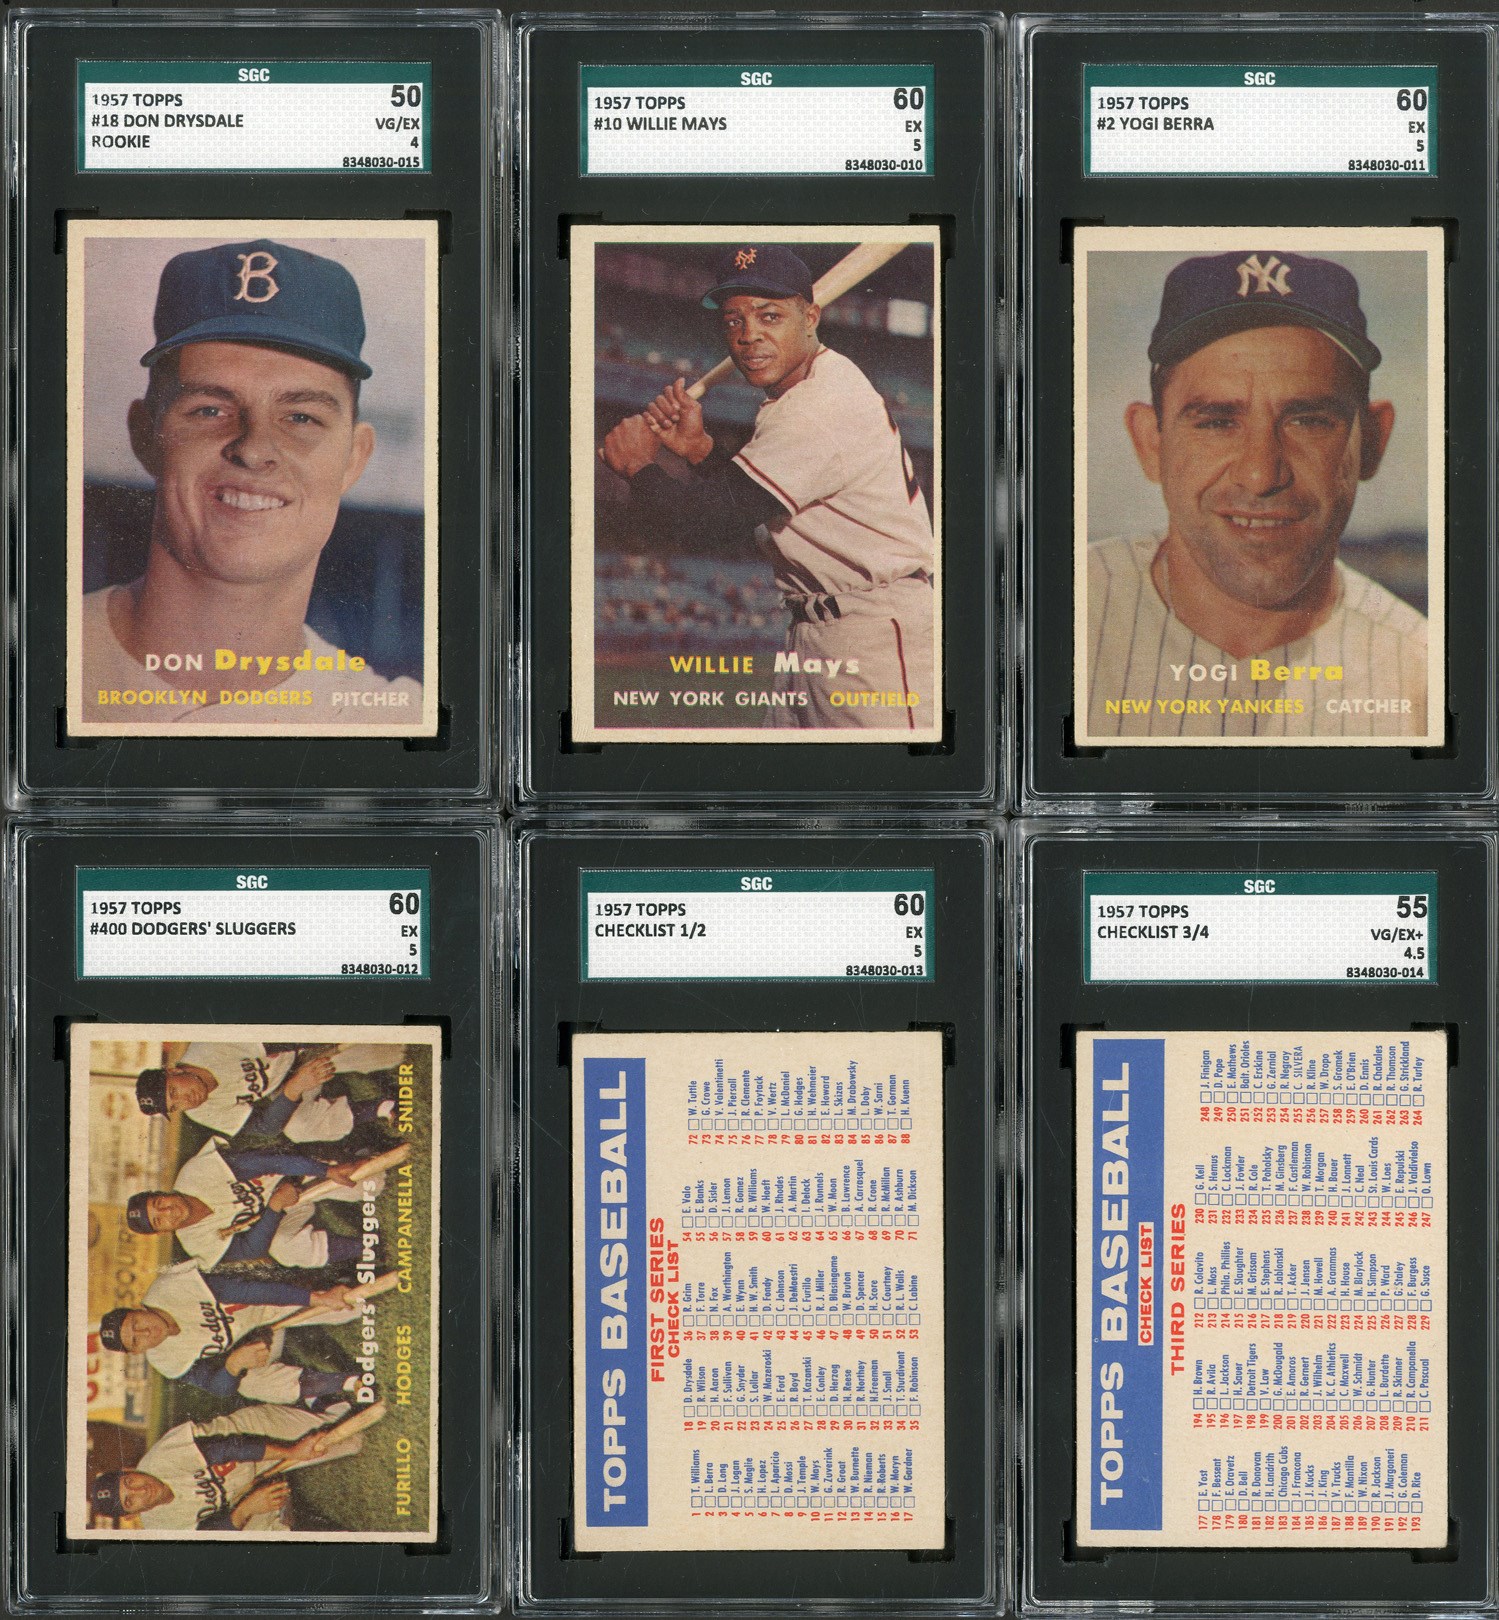 1957 Topps Complete Set (407 cards - 6 SGC Graded)